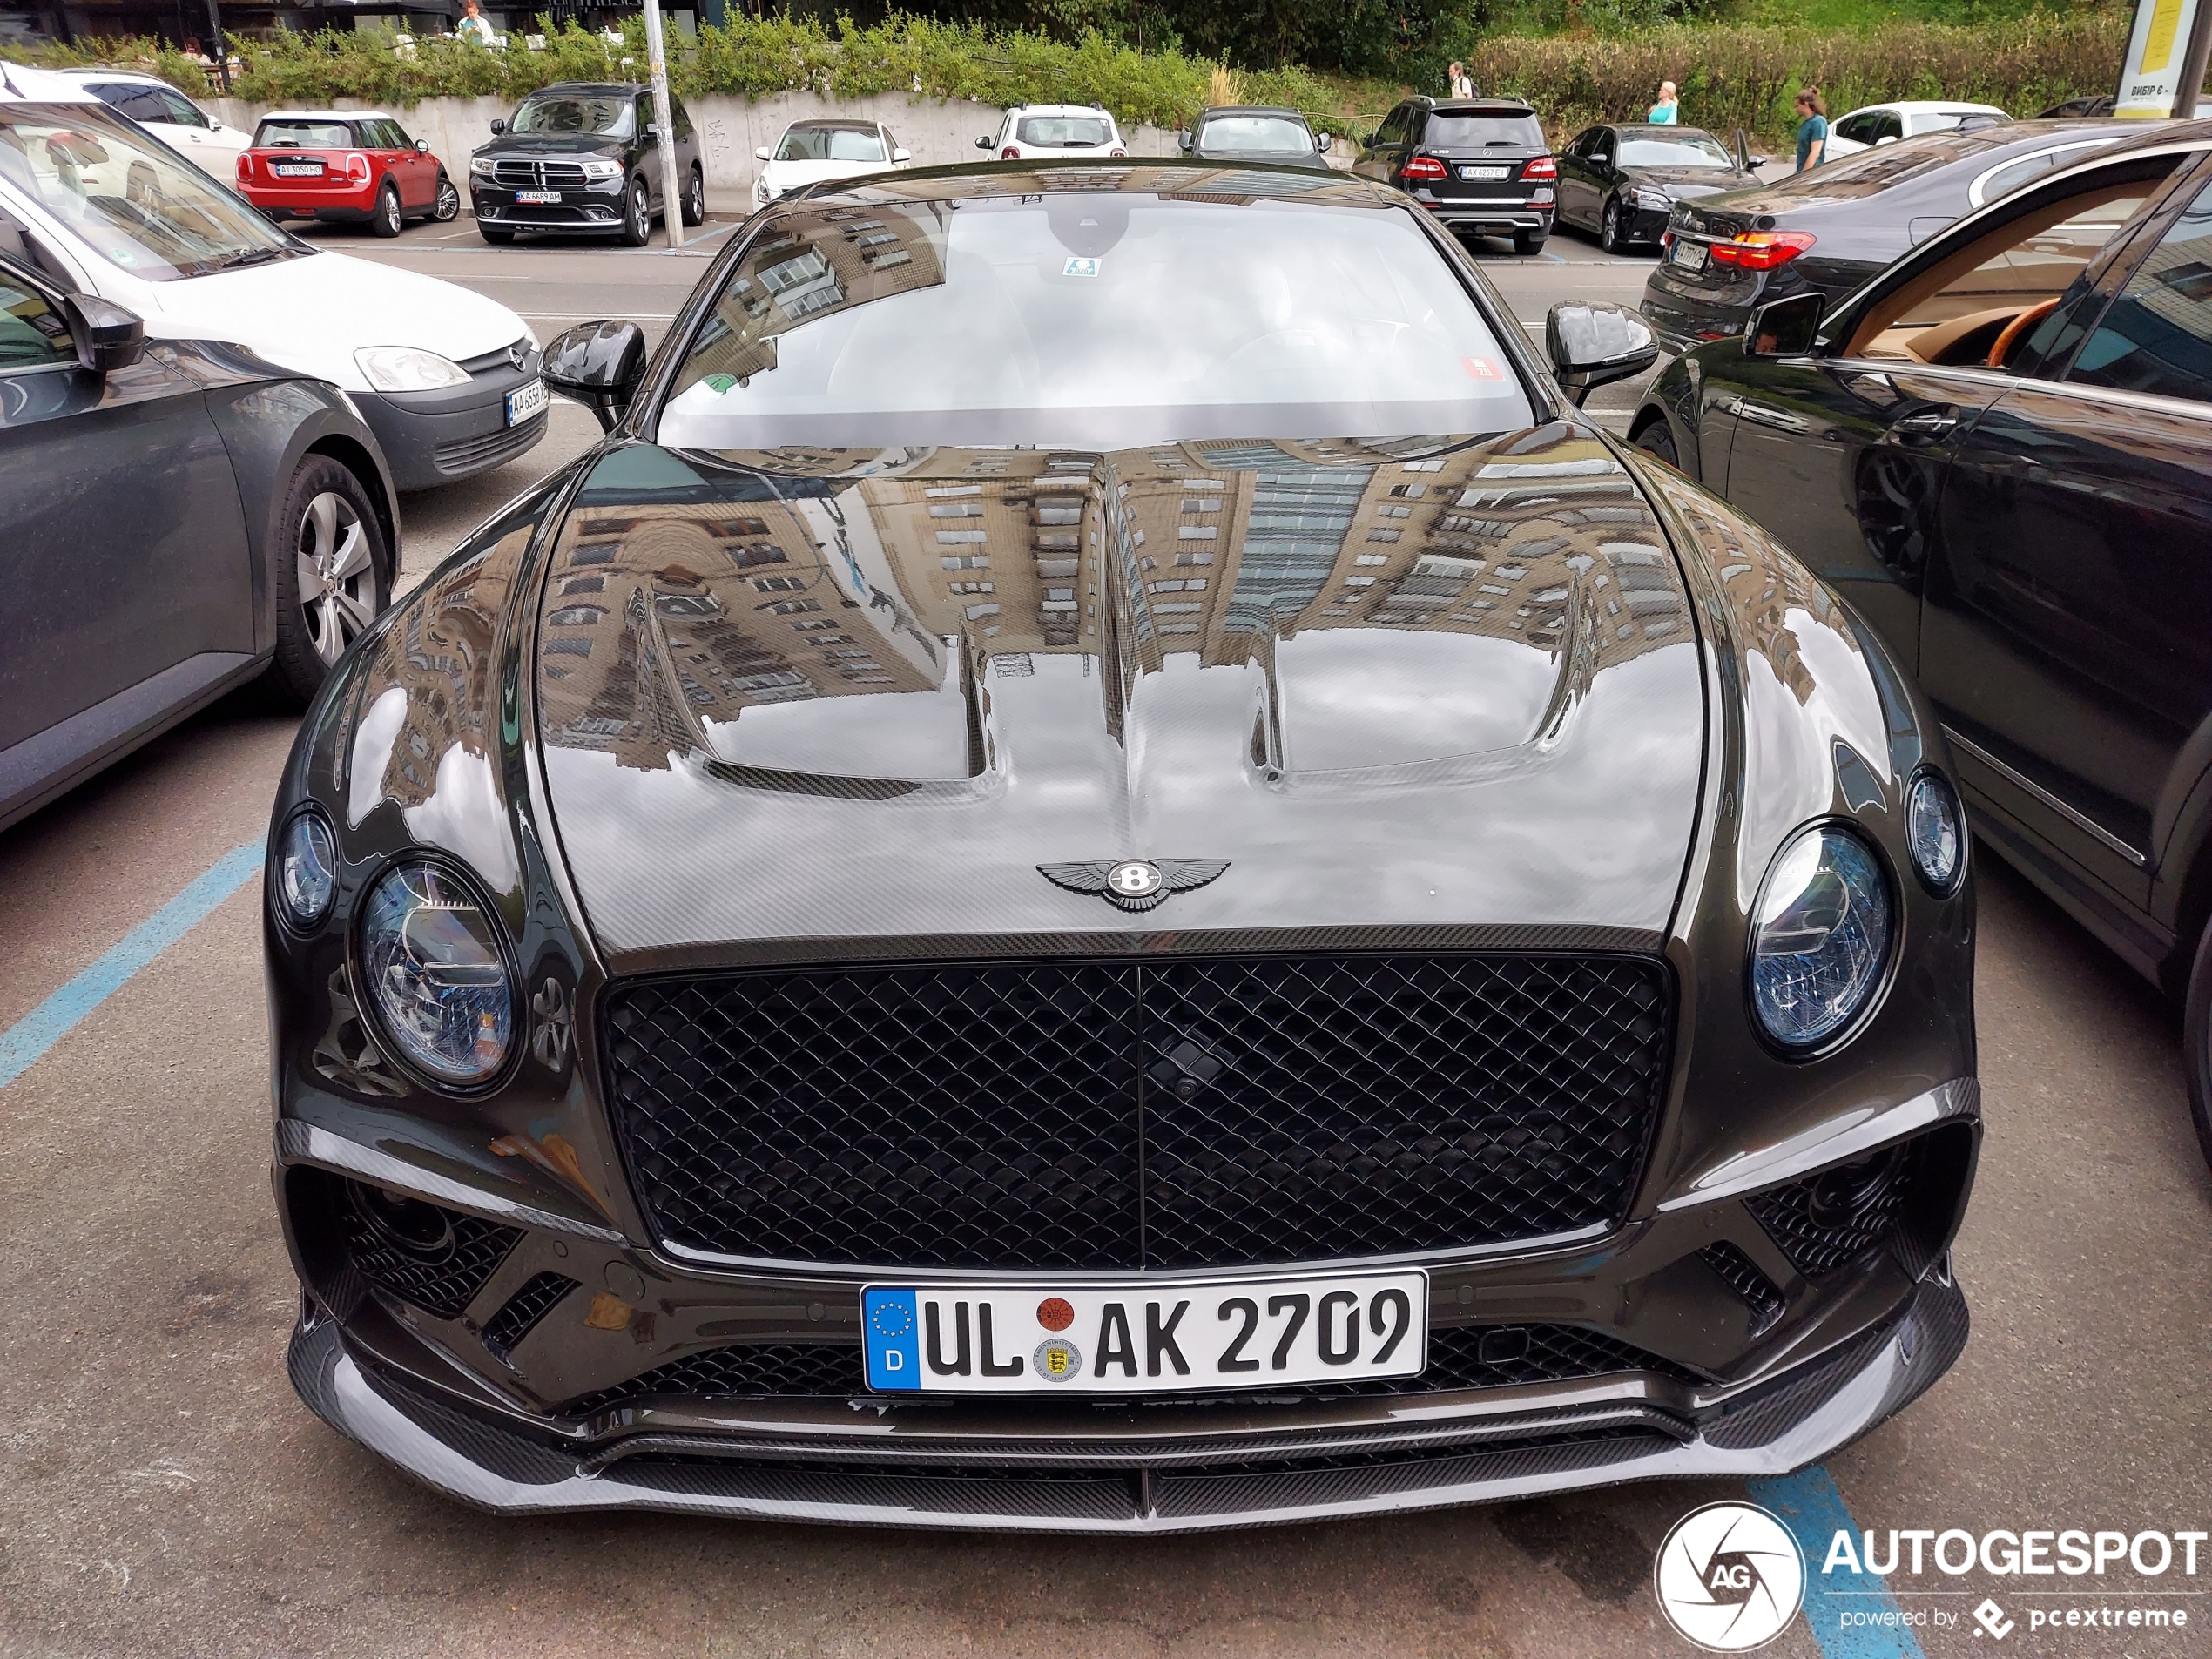 Bentley Mansory Continental GT 2018